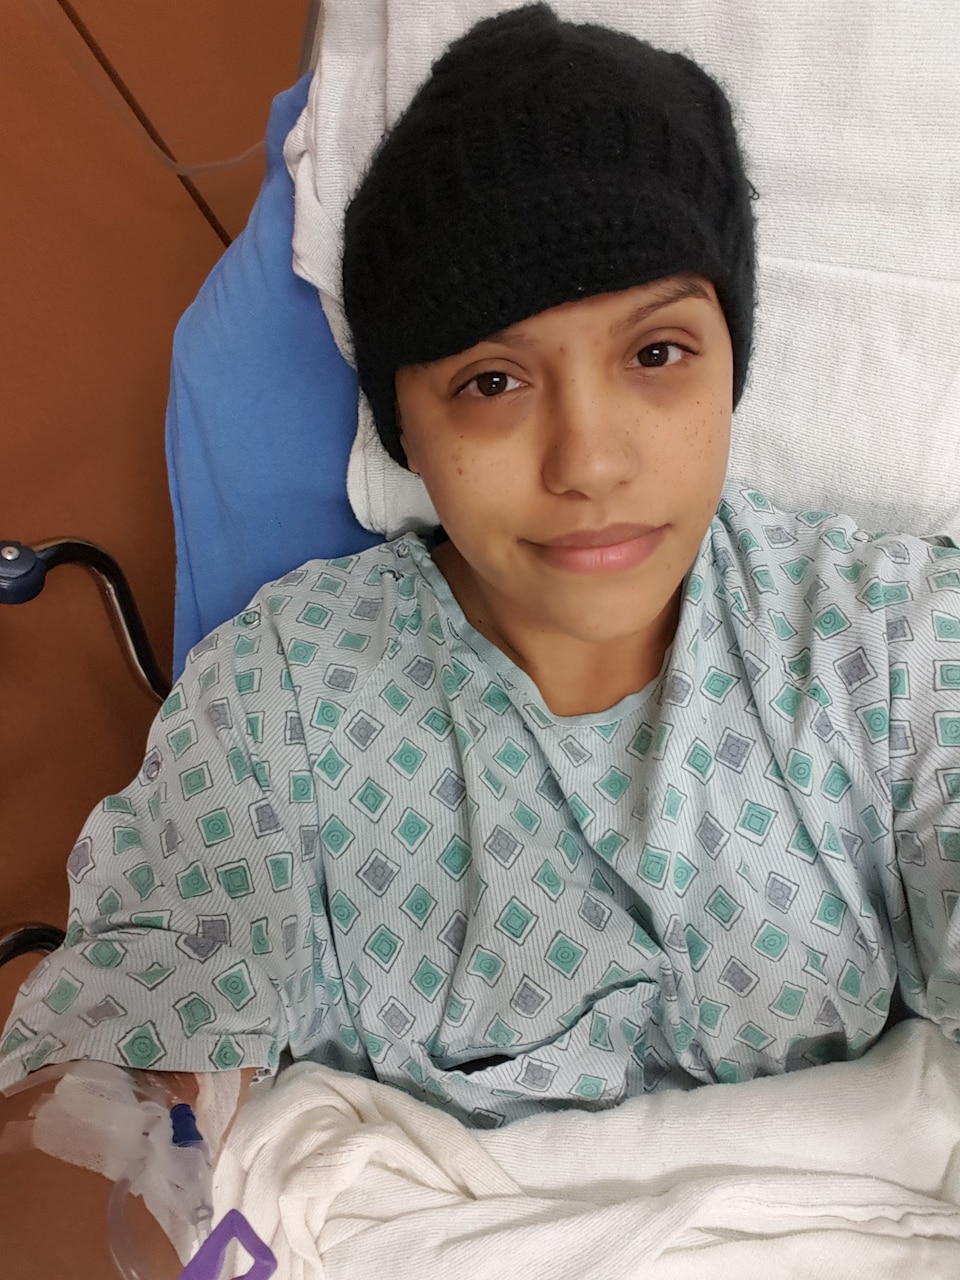 Staff Sgt. Teresa Monteon, 60th Medical Group training manager from San Jose, Calif., sits in her hospital bed during a nine-day hospitalization at David Grant USAF Medical Center in December 2016. Monteon was diagnosed with Hodgkin’s Lymphoma and is now in remission after undergoing four months of chemotherapy and one month of proton therapy. (Courtesy Photo)